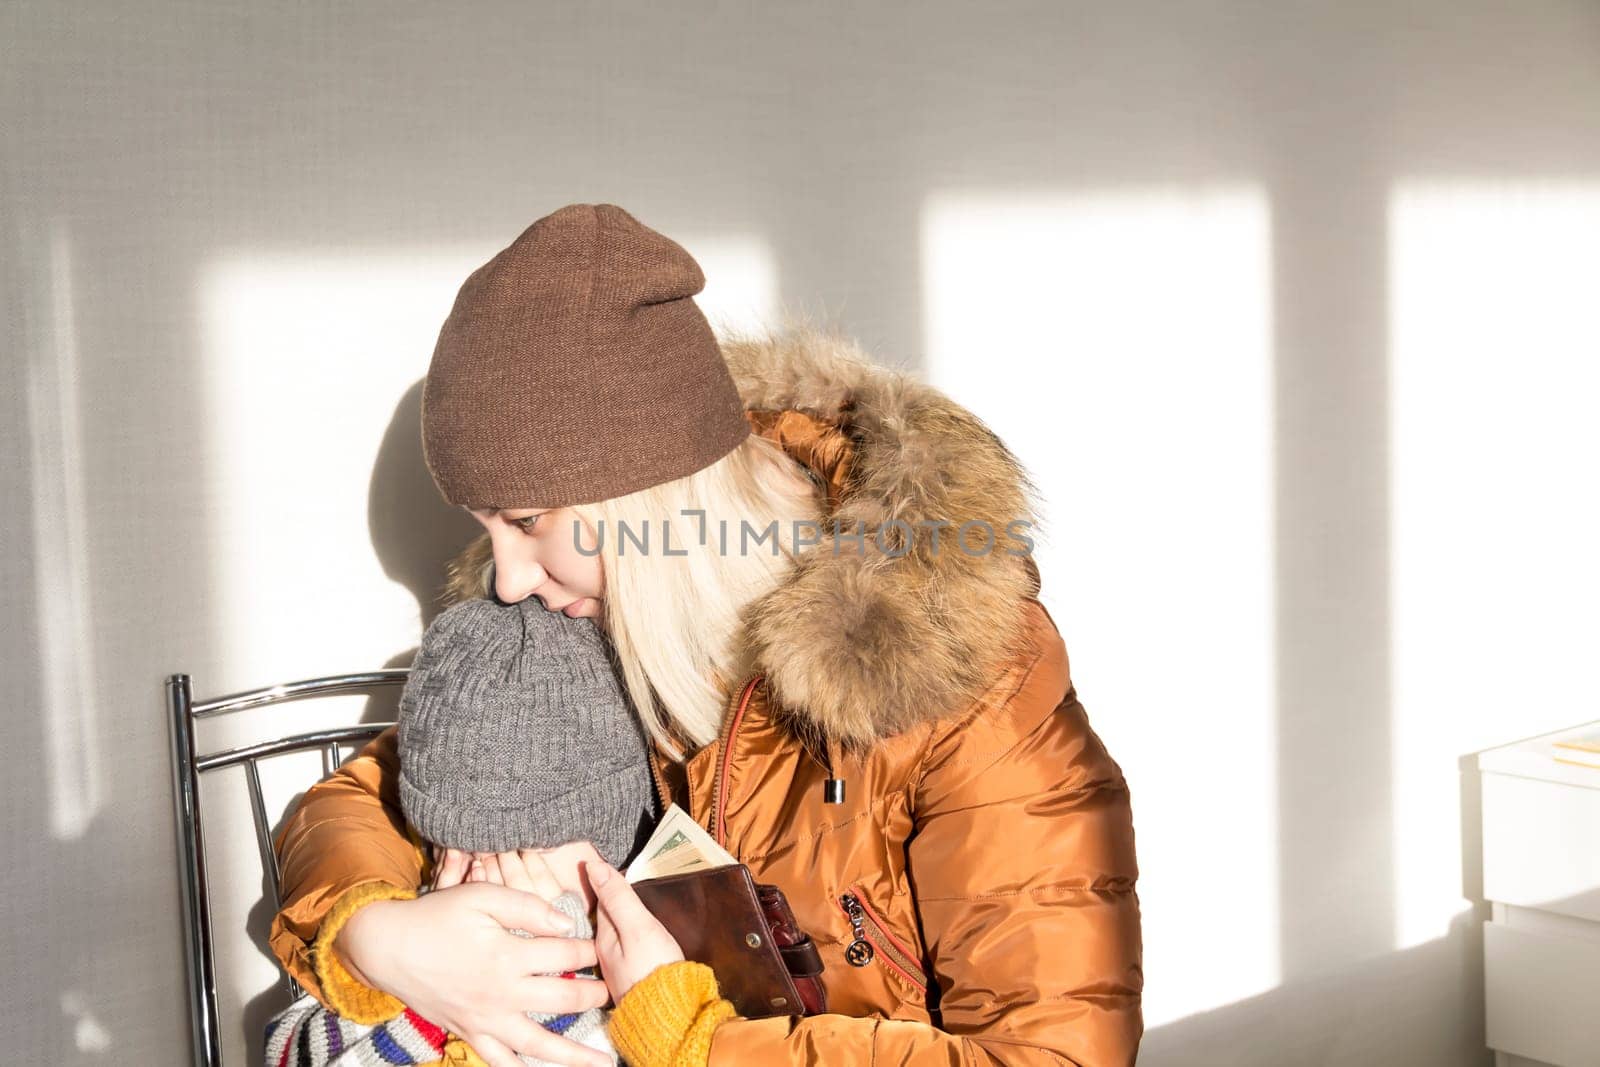 A small child is crying in her mother's arms from problems and stress. The concept of the economic crisis and large utility bills in homes. by Alla_Yurtayeva